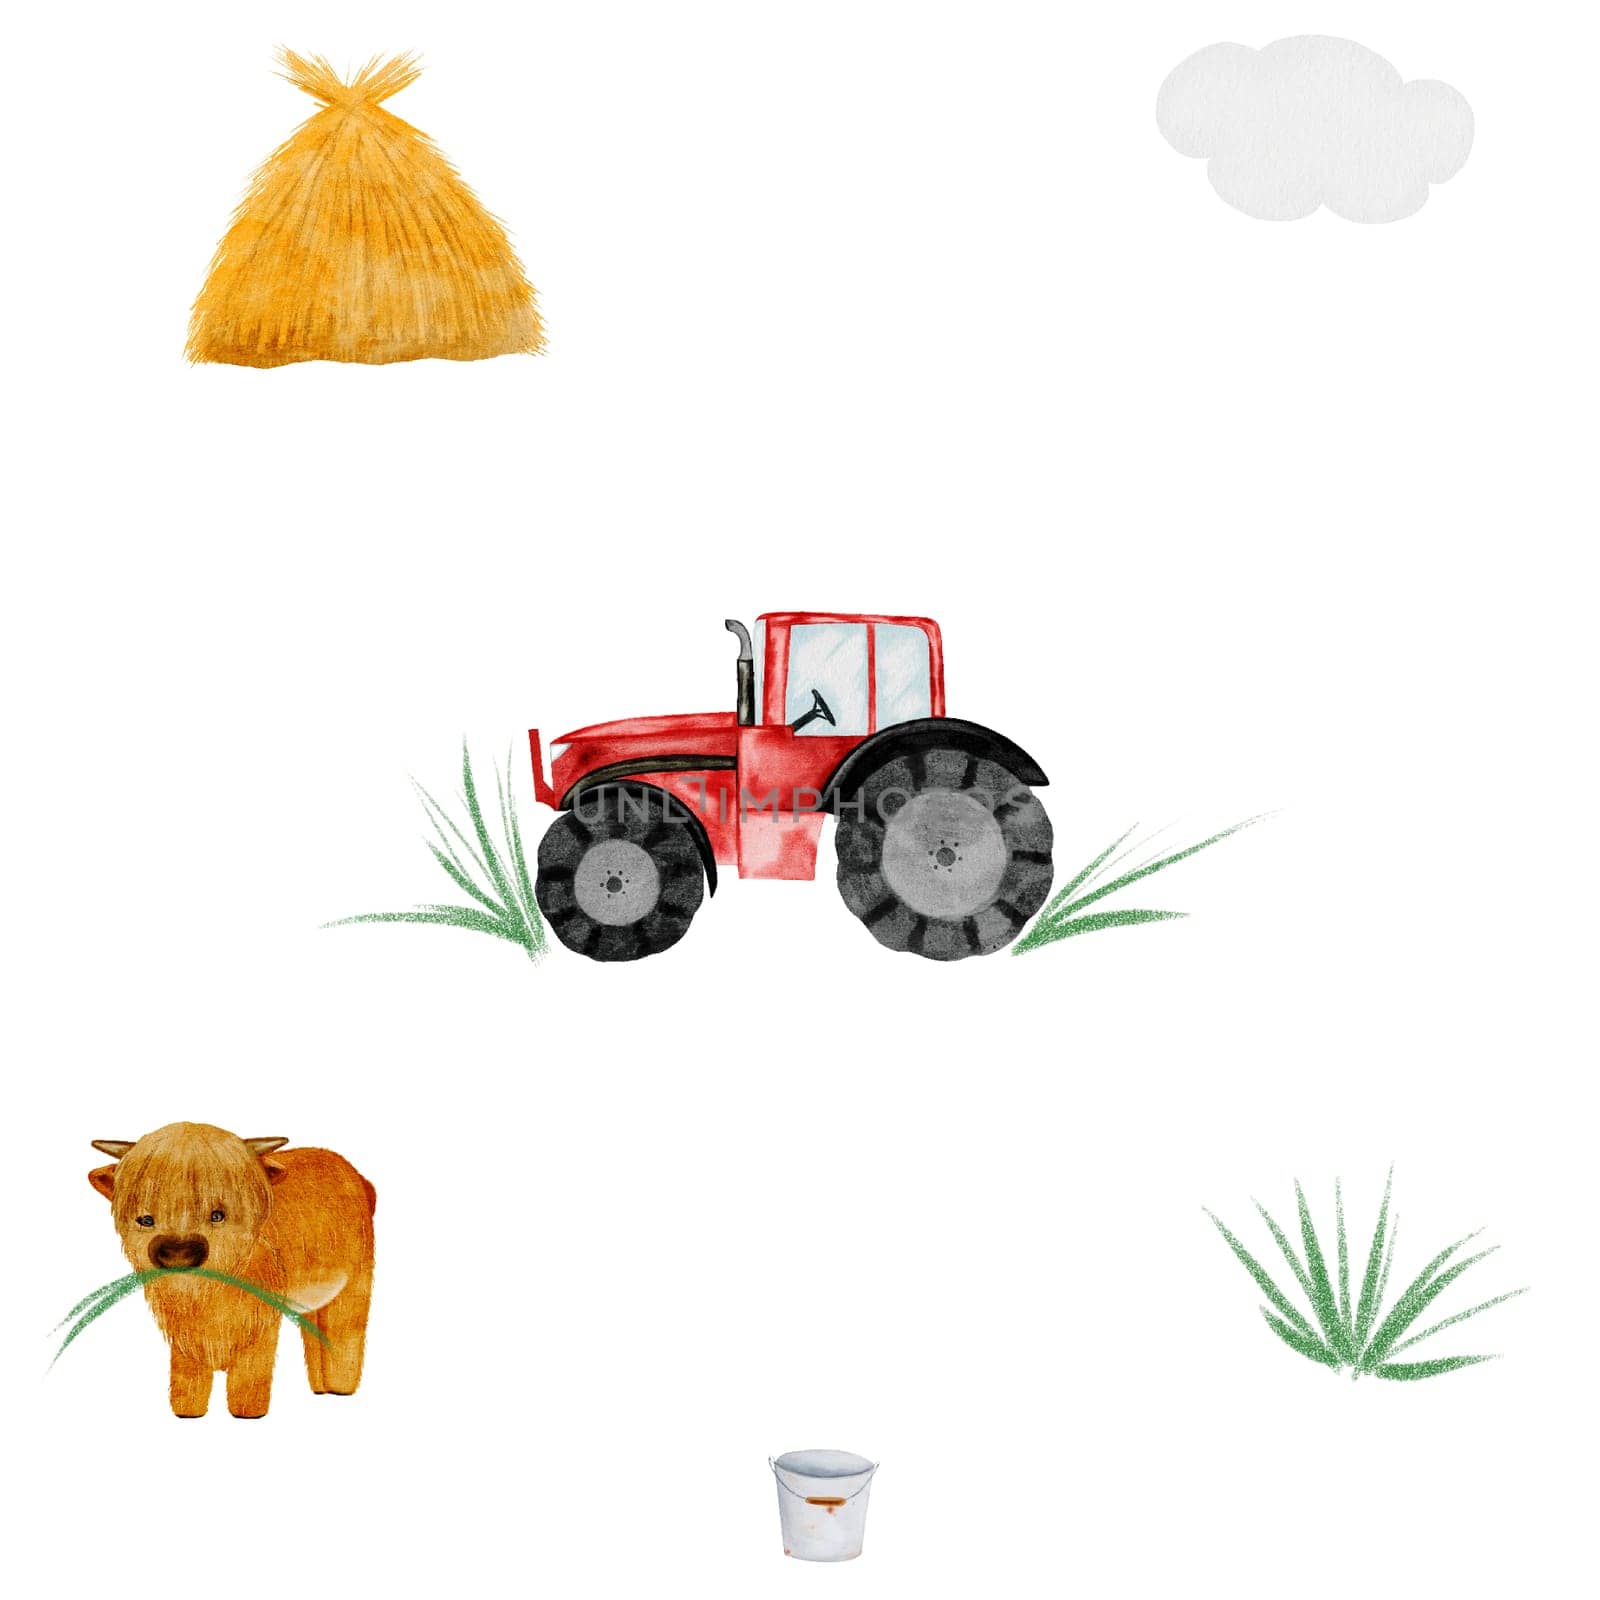 Farm watercolor seamless pattern. Drawing of a red toy car, bull, haystack, grass and cloud on a white background. Illustration of an agricultural machine. For children's textiles, bed linen, diapers, diapers for boys